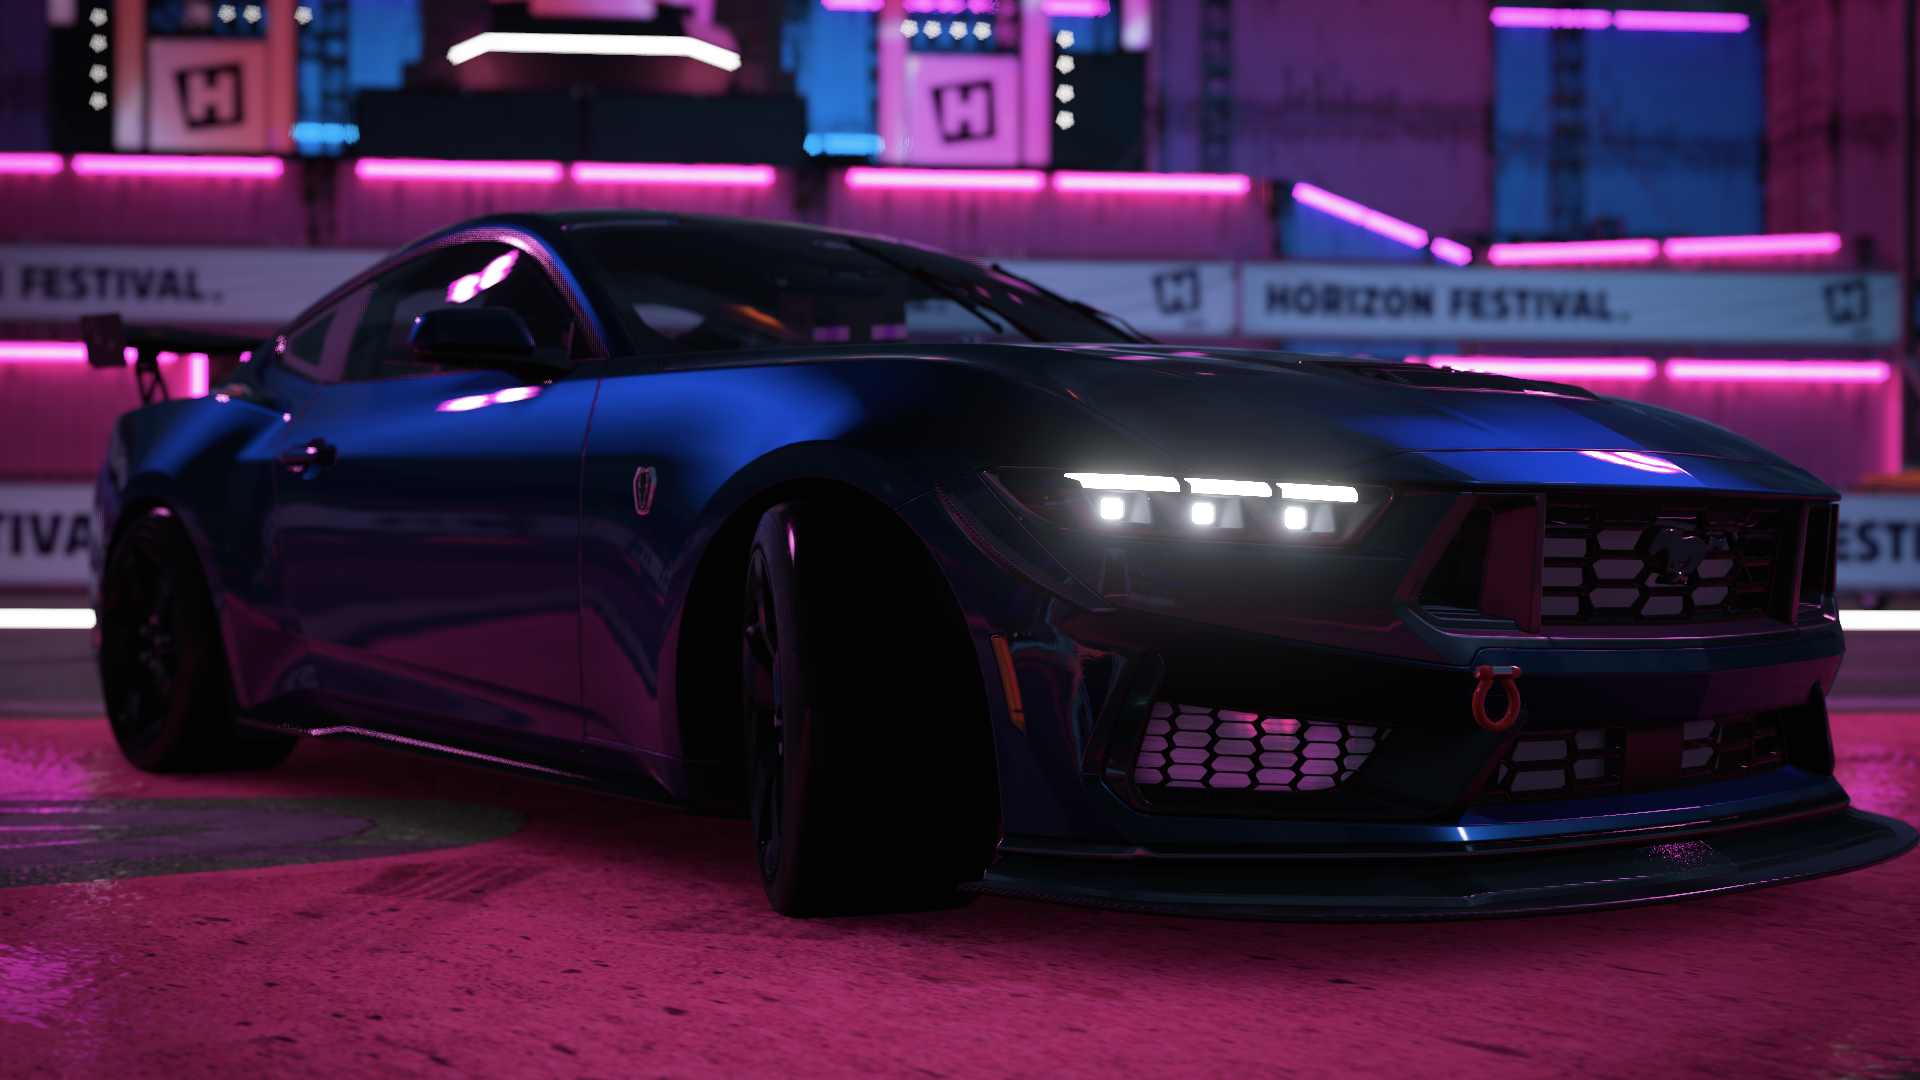 2025 Ford Mustang Dark Horse Forza Horizon 5 Car Neon Reflection Video Games Ford V8 Engine Muscle C 1920x1080